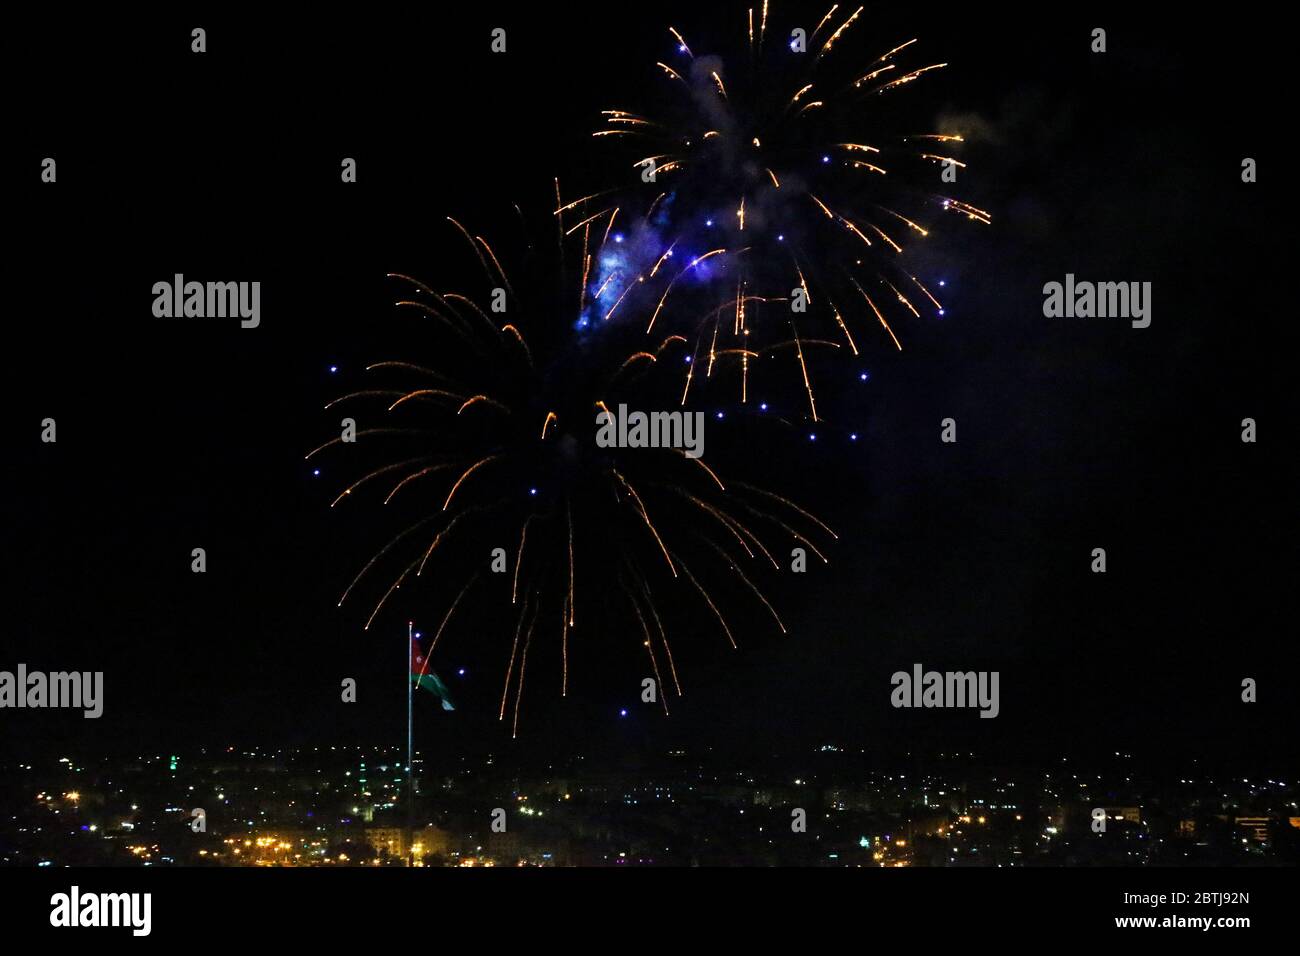 May 25, 2020: Amman, Jordan. 25 May 2020. Fireworks are displayed in Amman to celebrate the 74th anniversary of Jordan Independence Day. The commemoration of Jordan National Day, which is celebrated every year on 25th May, included fireworks, military parades, and a speech by King Abdullah II of Jordan. Independence Day marks the country's independence from British rule on 25 May 1946, and the following declaration of the Hashemite Kingdom of Jordan. The national flag was widely displayed to symbolise the significance of the day for the country (Credit Image: © Stringer/IMAGESLIVE via ZUMA Stock Photo